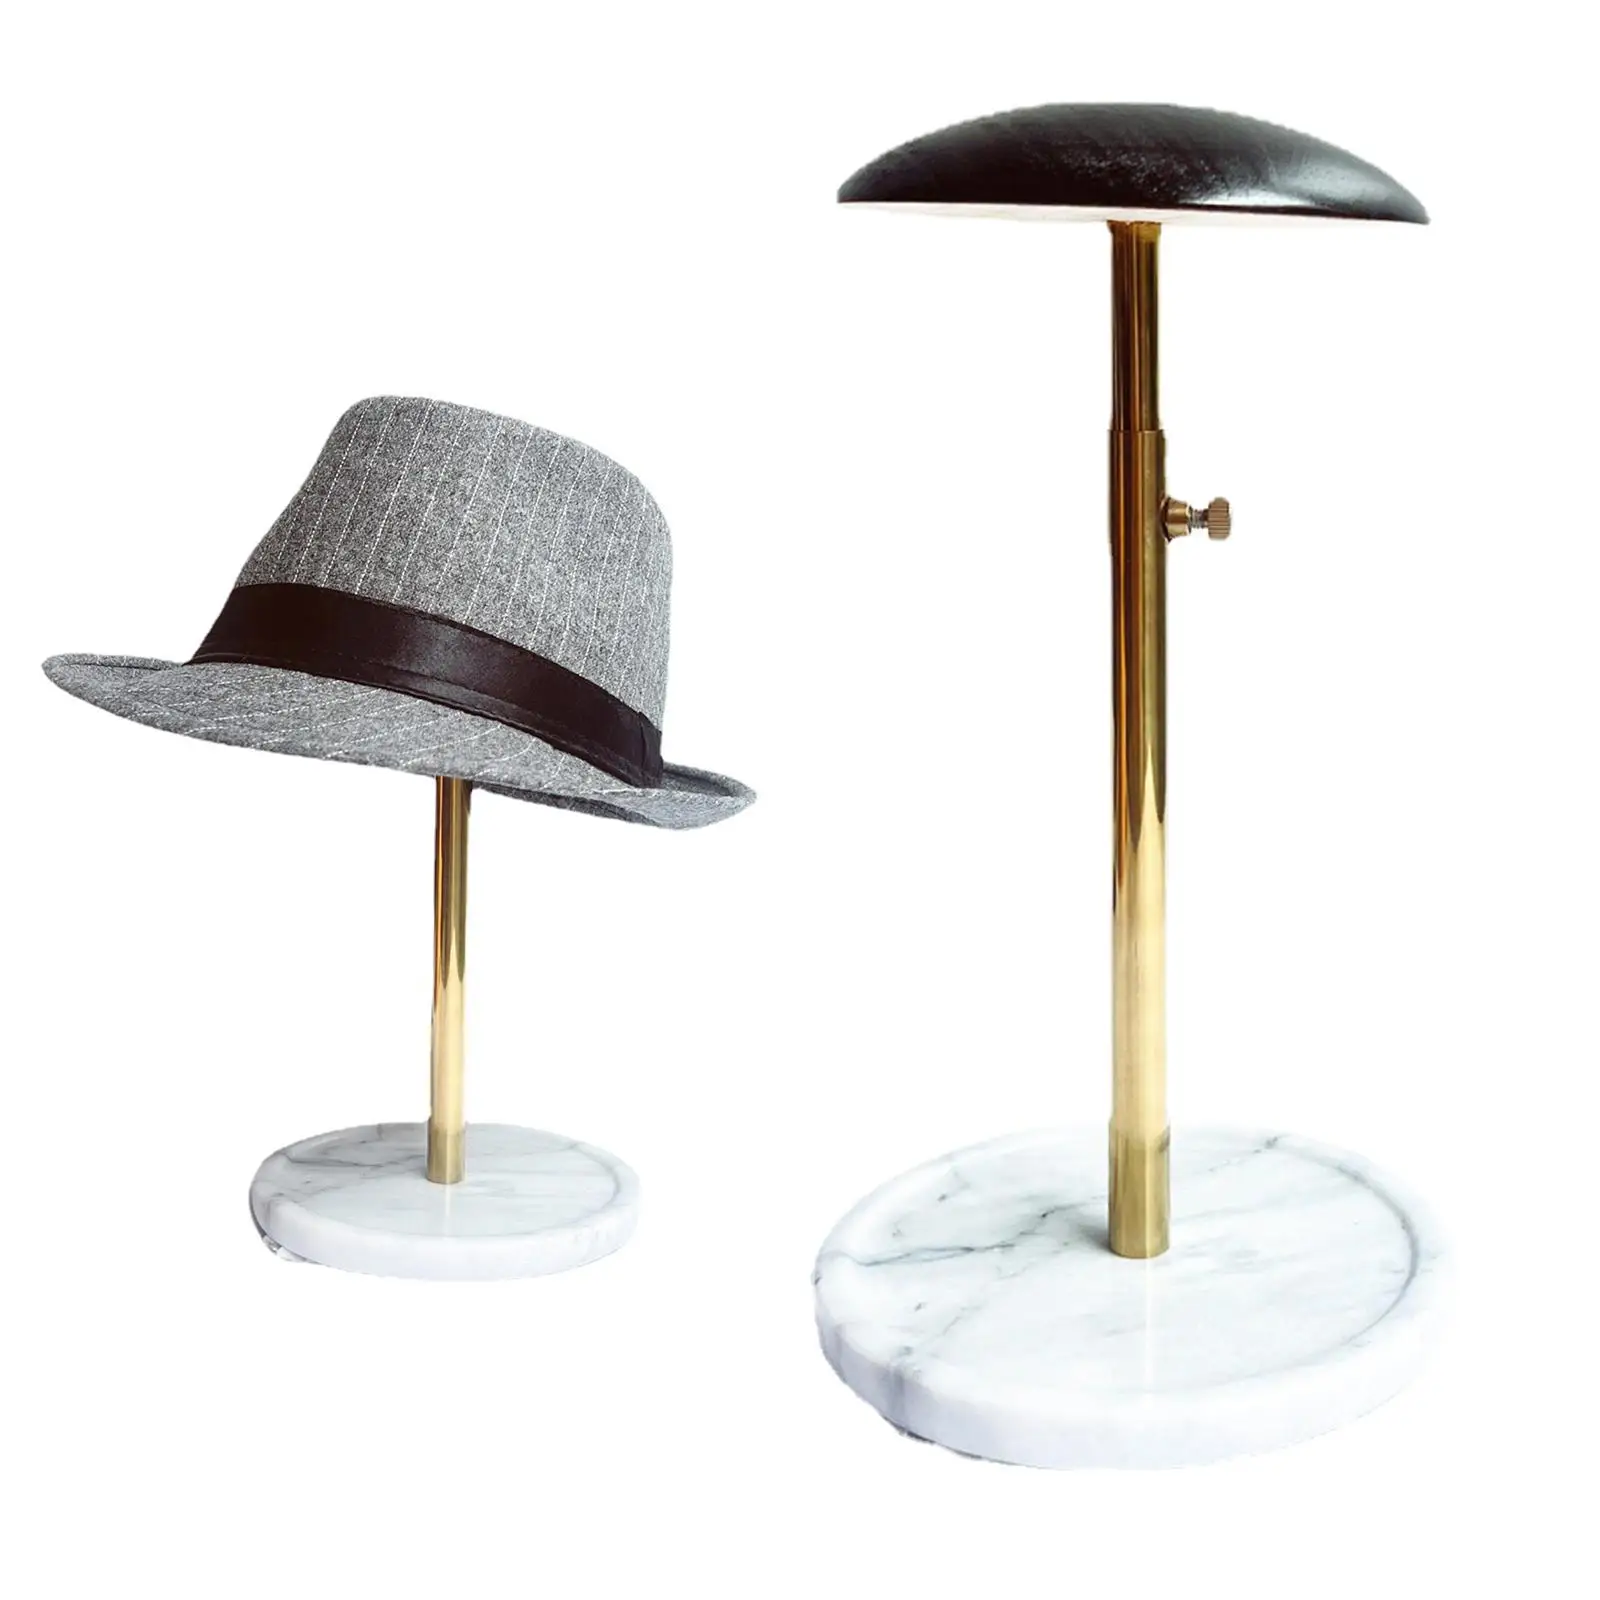 Portable Hat Display Stand Wig Stand Detachable Creative Storage Rack Home Salon Tool Hat Head Stand Display Adjustable Height